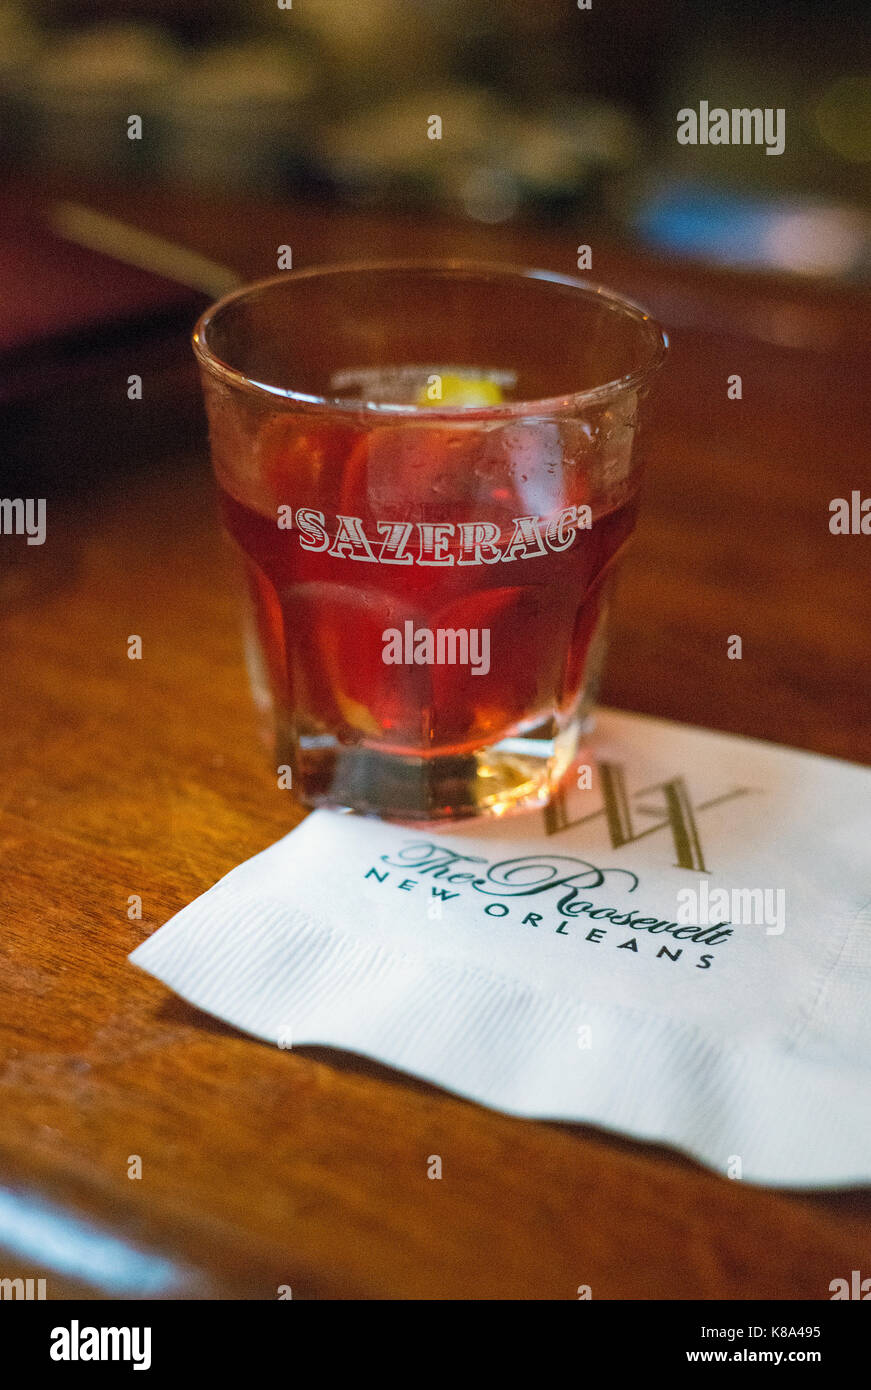 A Sazerac drink at The Roosevelt Hotel in New Orleans, Louisiana. Stock Photo